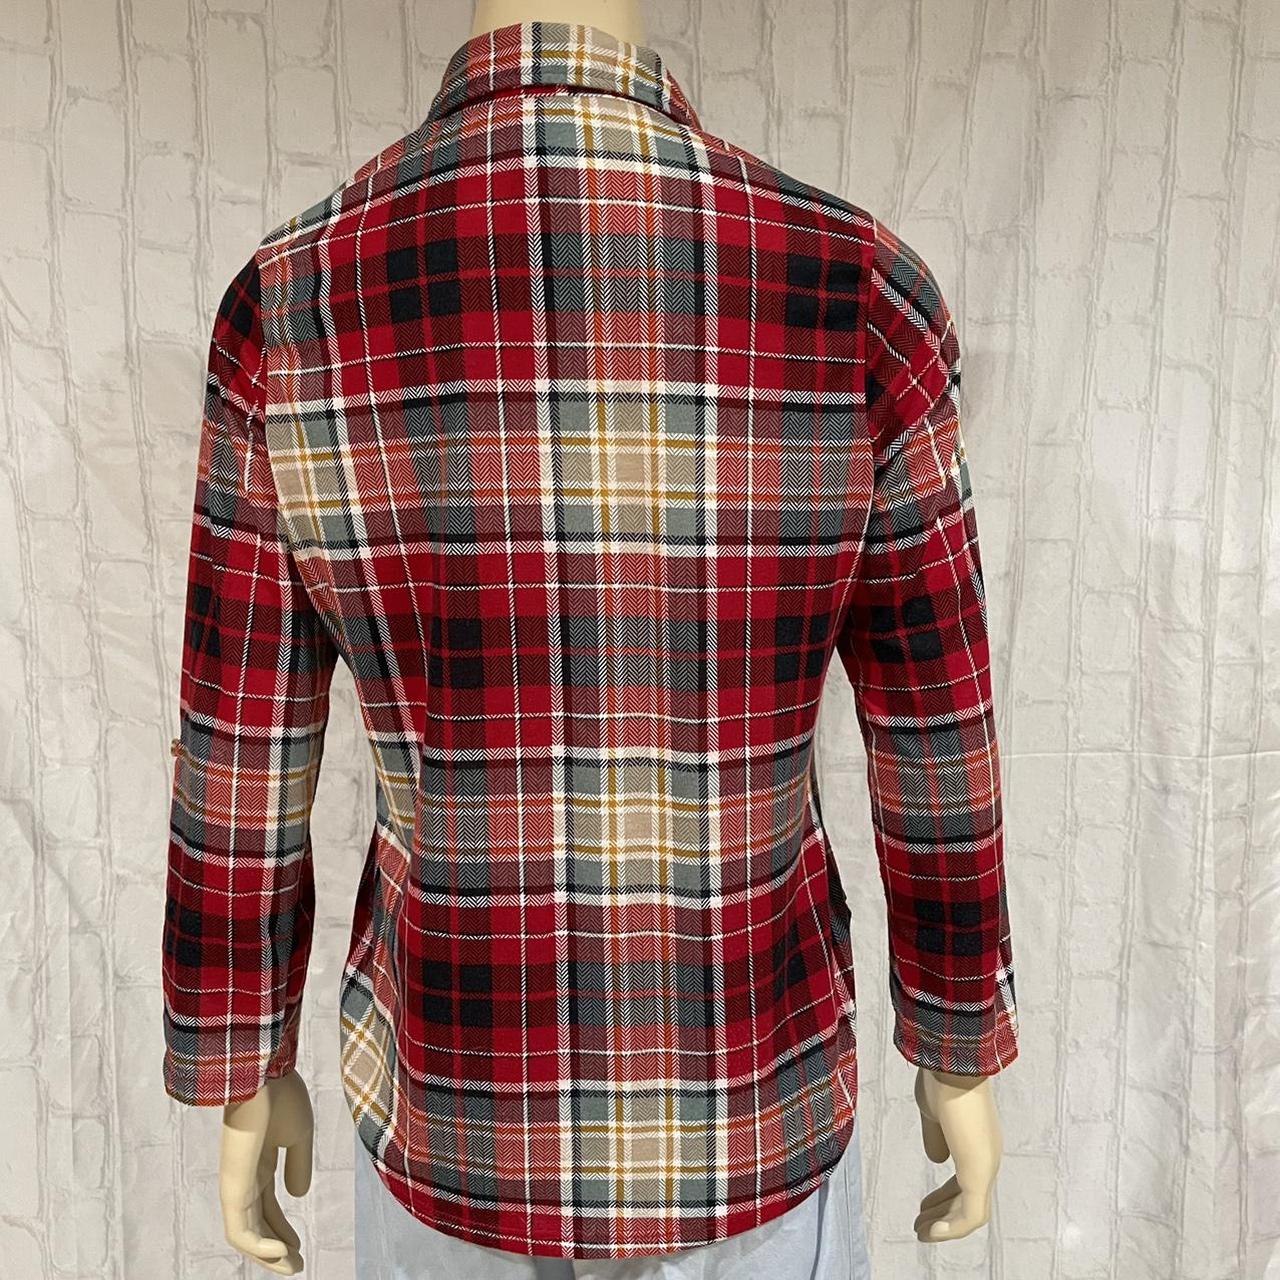 Product Image 3 - Polly & Esther Women’s Plaid